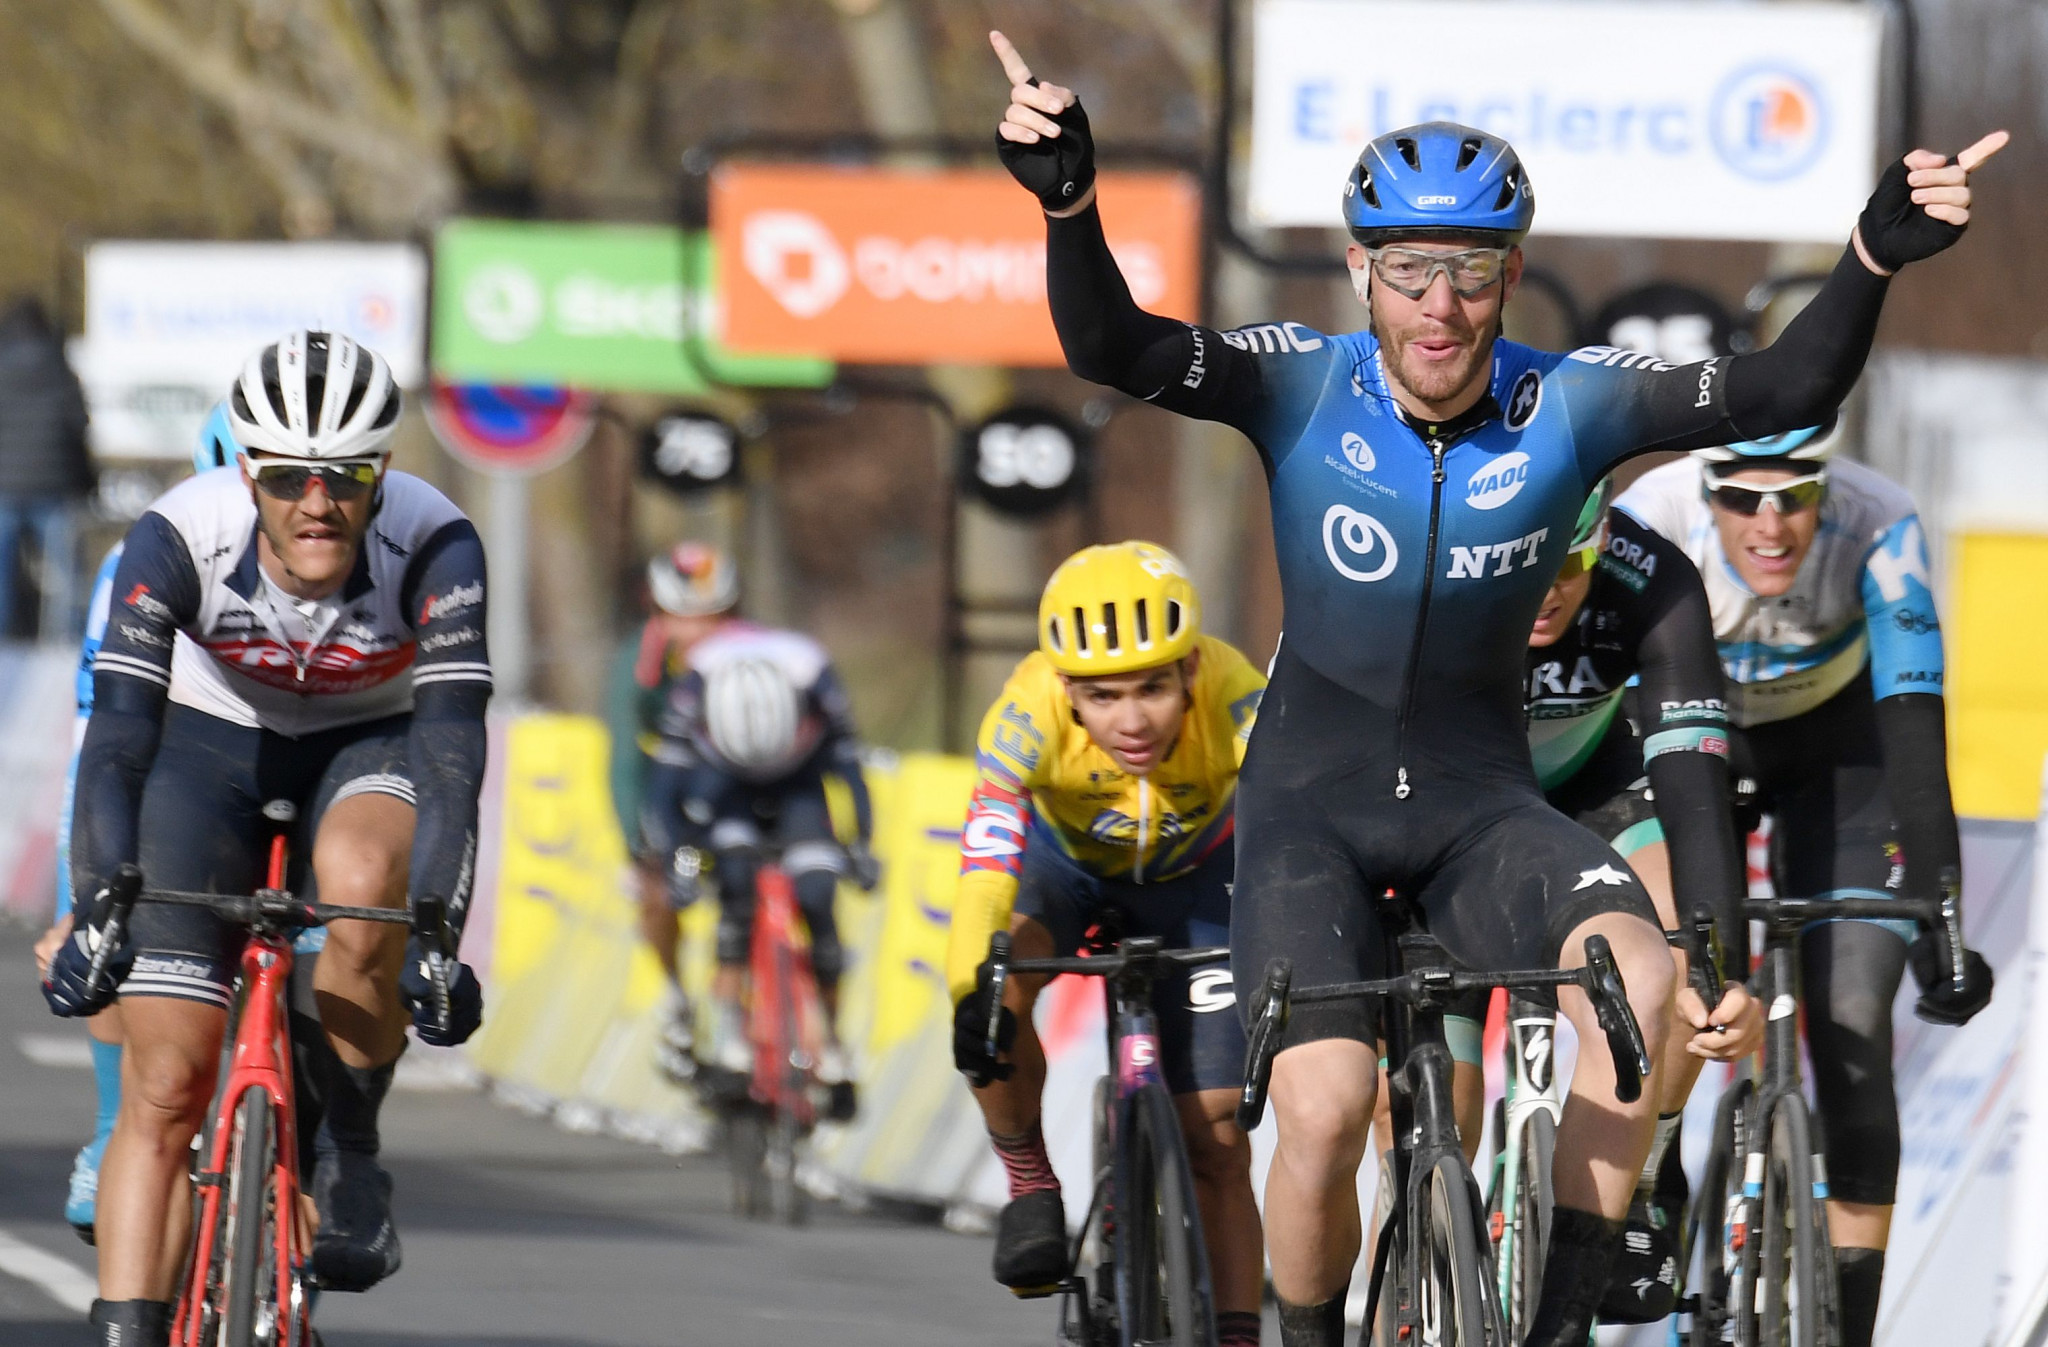 Giacomo Nizzolo of Italy edged Pascal Ackermann of Germany in a sprint finish to win the second stage of the Paris-Nice ©Getty Images